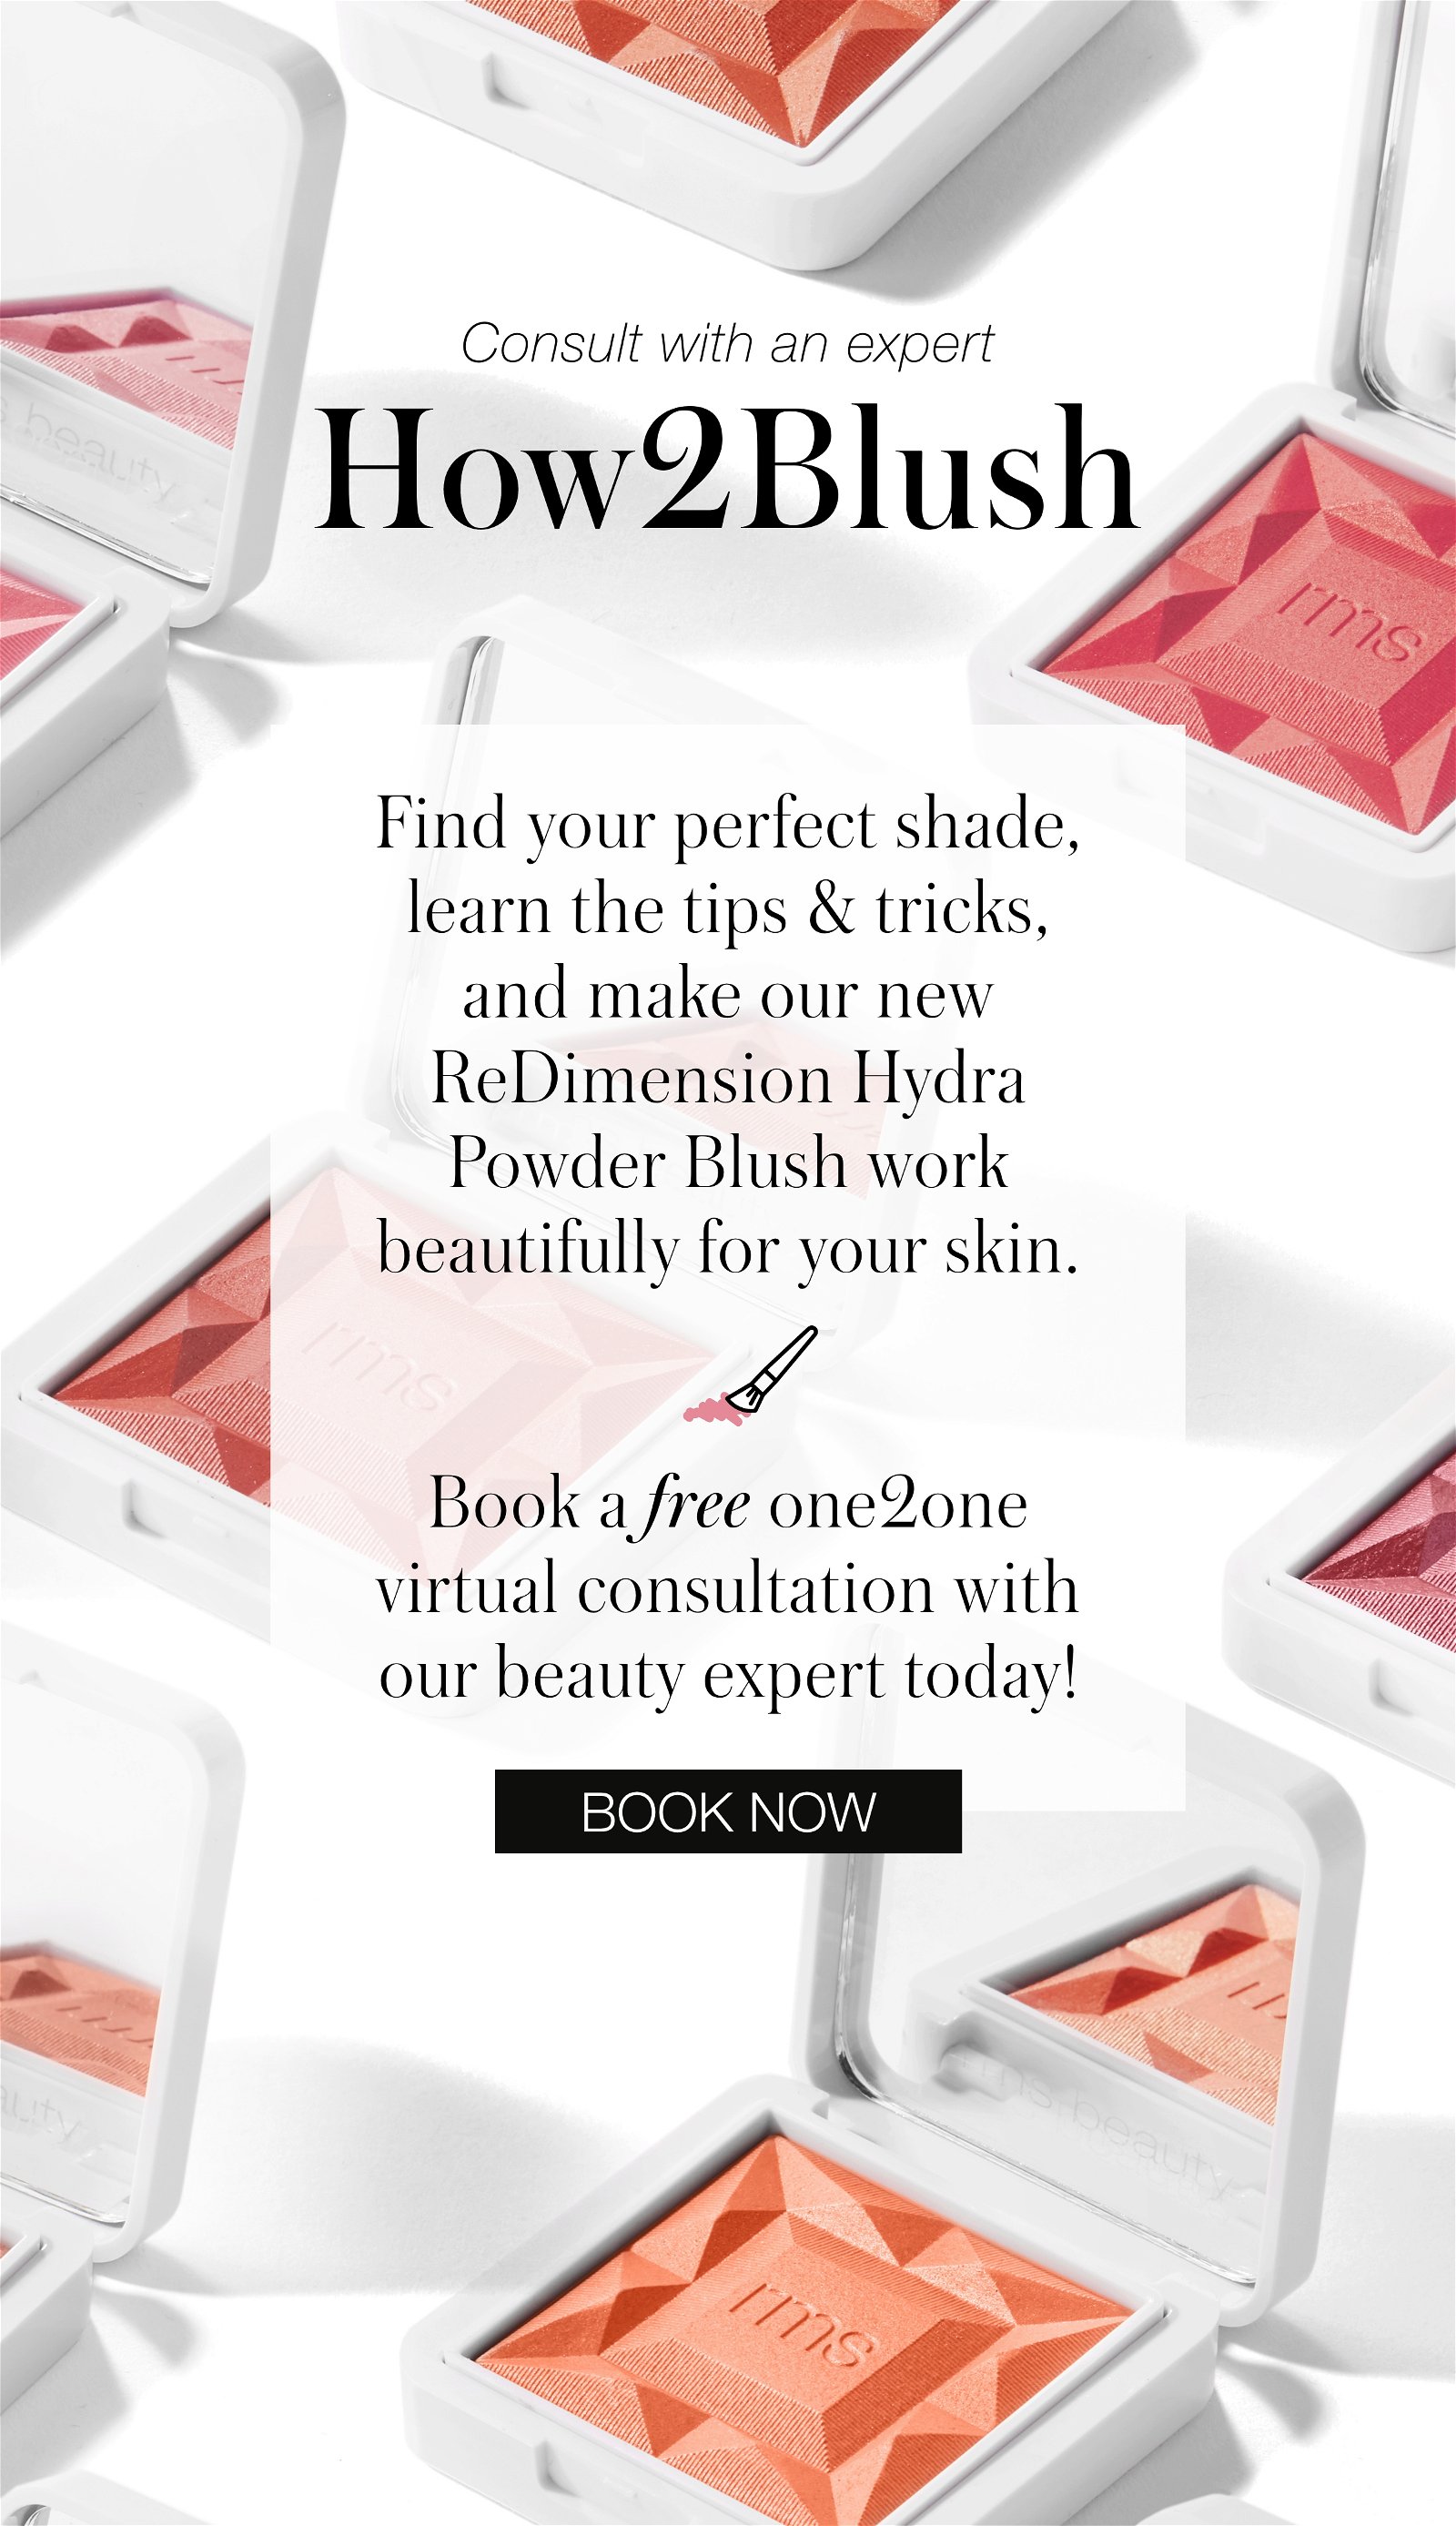 Consult with an expert for How2Blush. Find your perfect shade, learn the tips and tricks, and make our new ReDimension Hydra Powder Blush work beautifully for your skin. Book a free one2one virtual consultation with our beauty expert today!